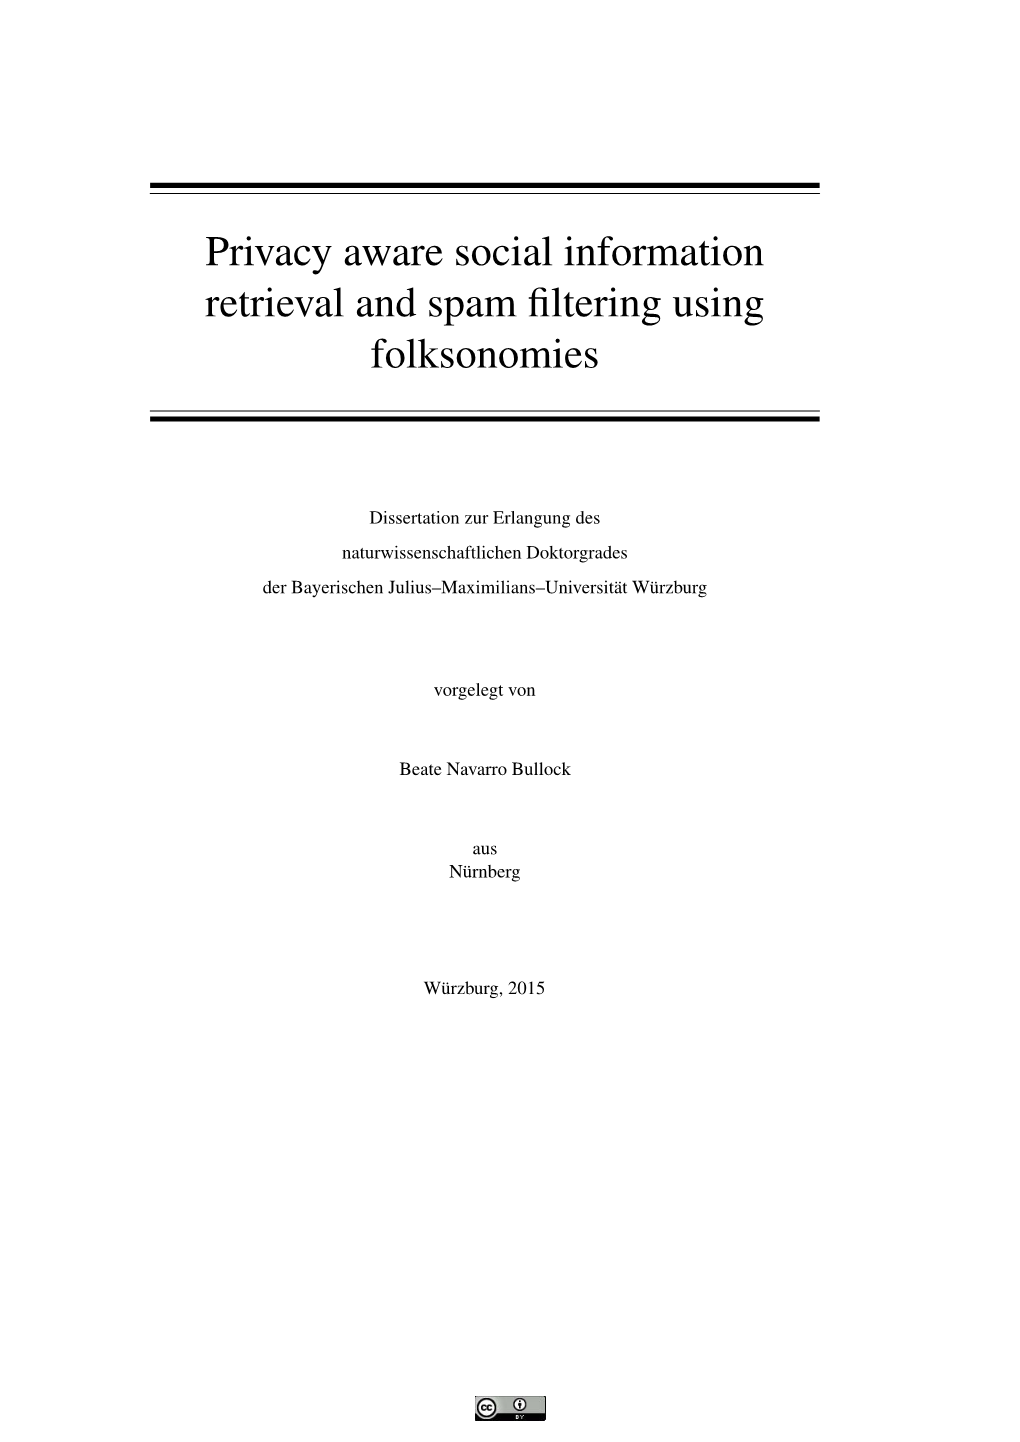 Privacy Aware Social Information Retrieval and Spam Filtering Using